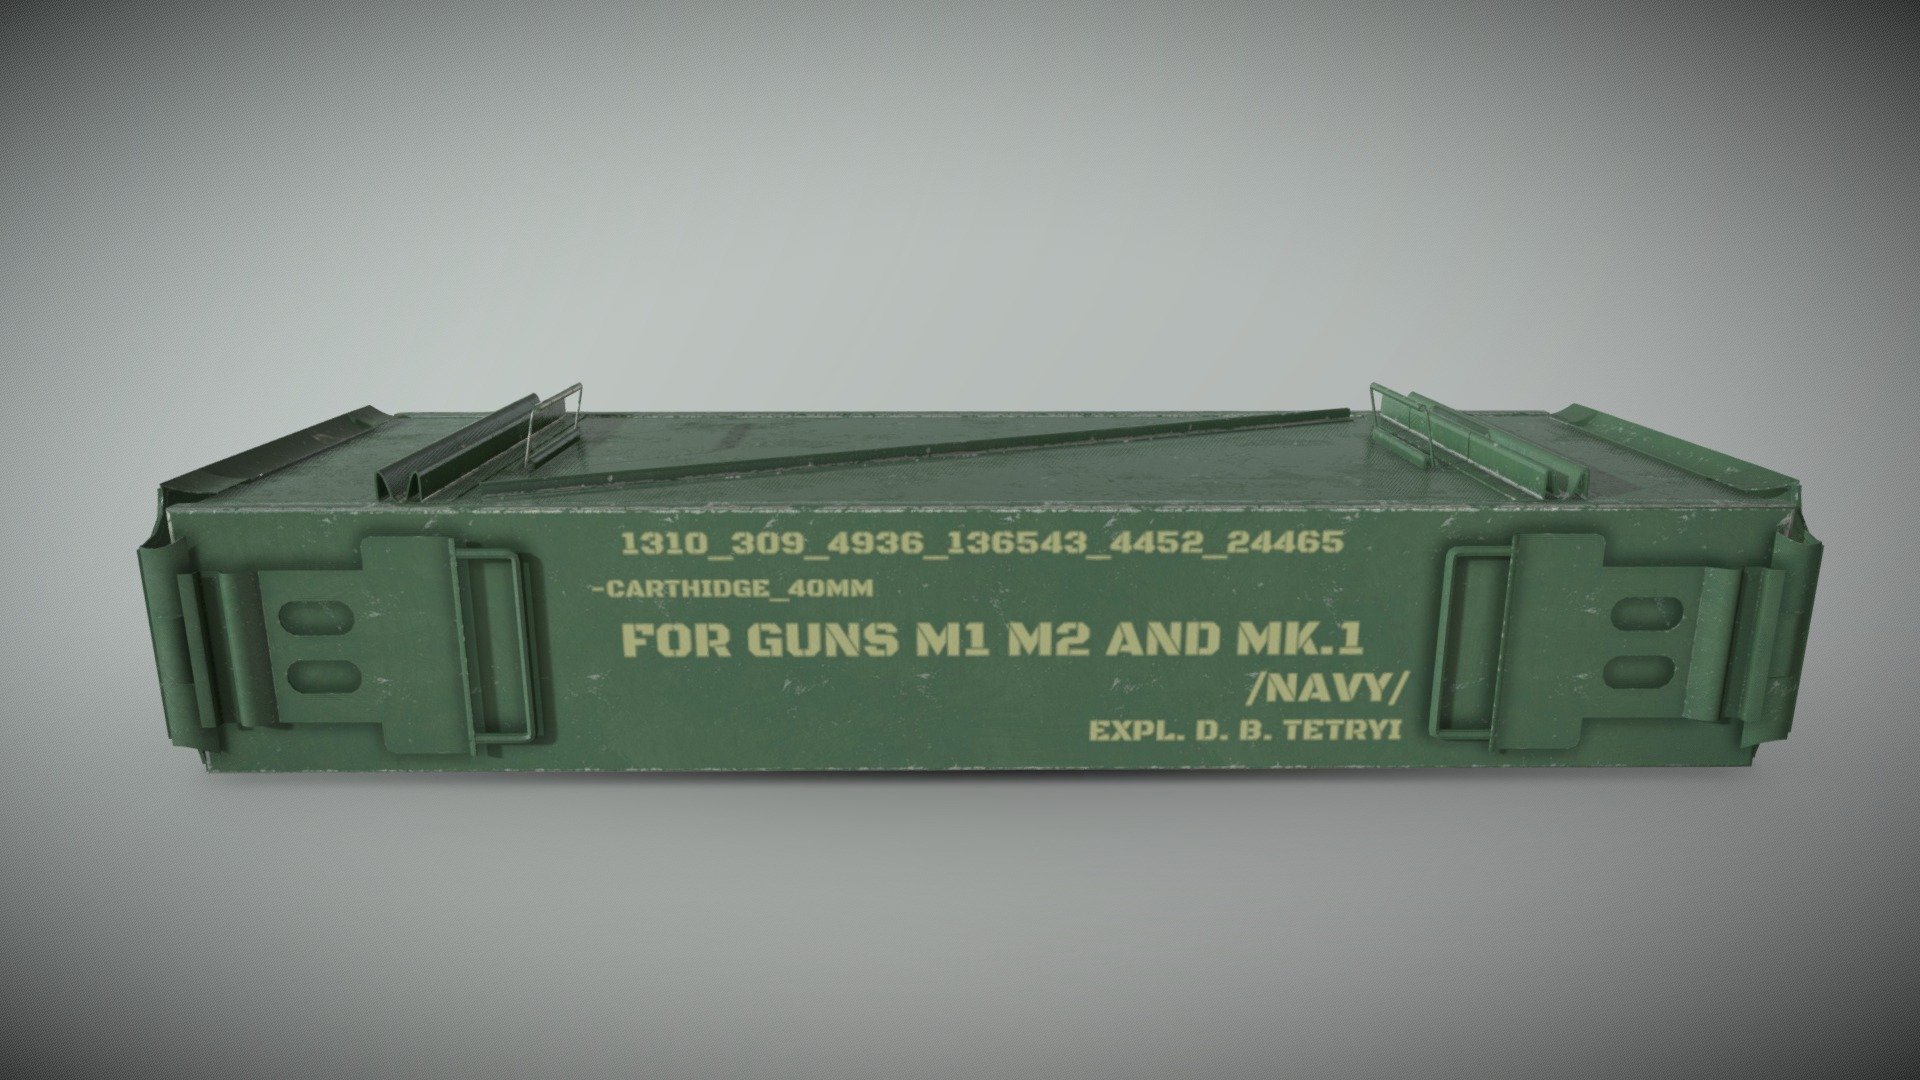 3D game-ready model of Ammo Crate

PBR 4k texture set. Made with one own material.

Can be used in games as well as render pictures 3d model